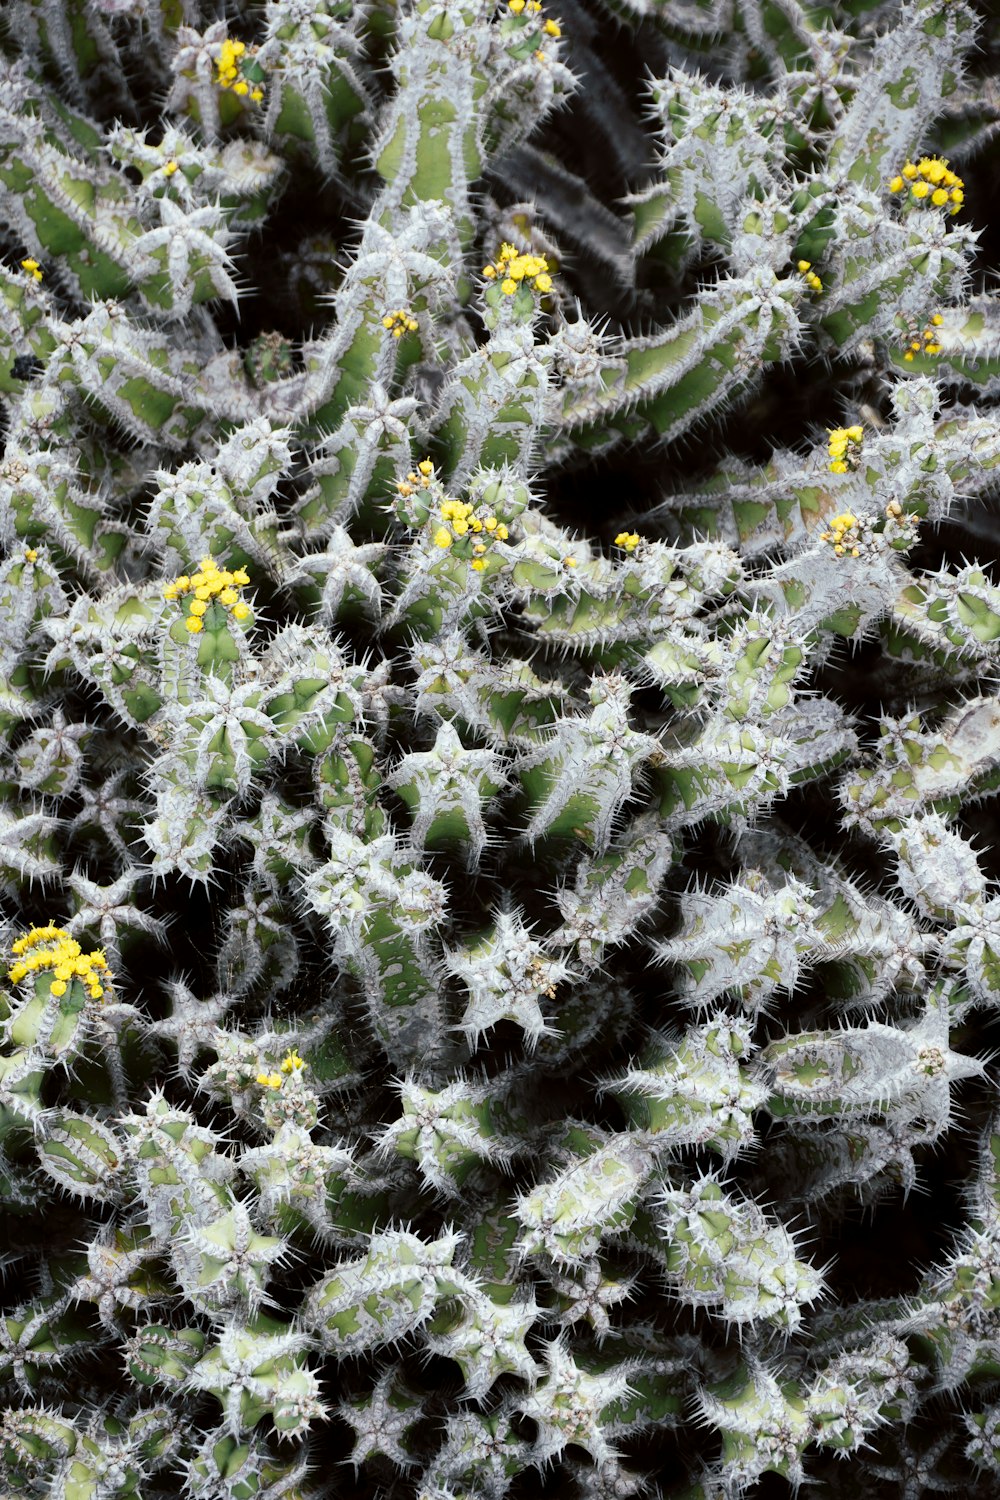 a close up of a cactus plant with yellow flowers